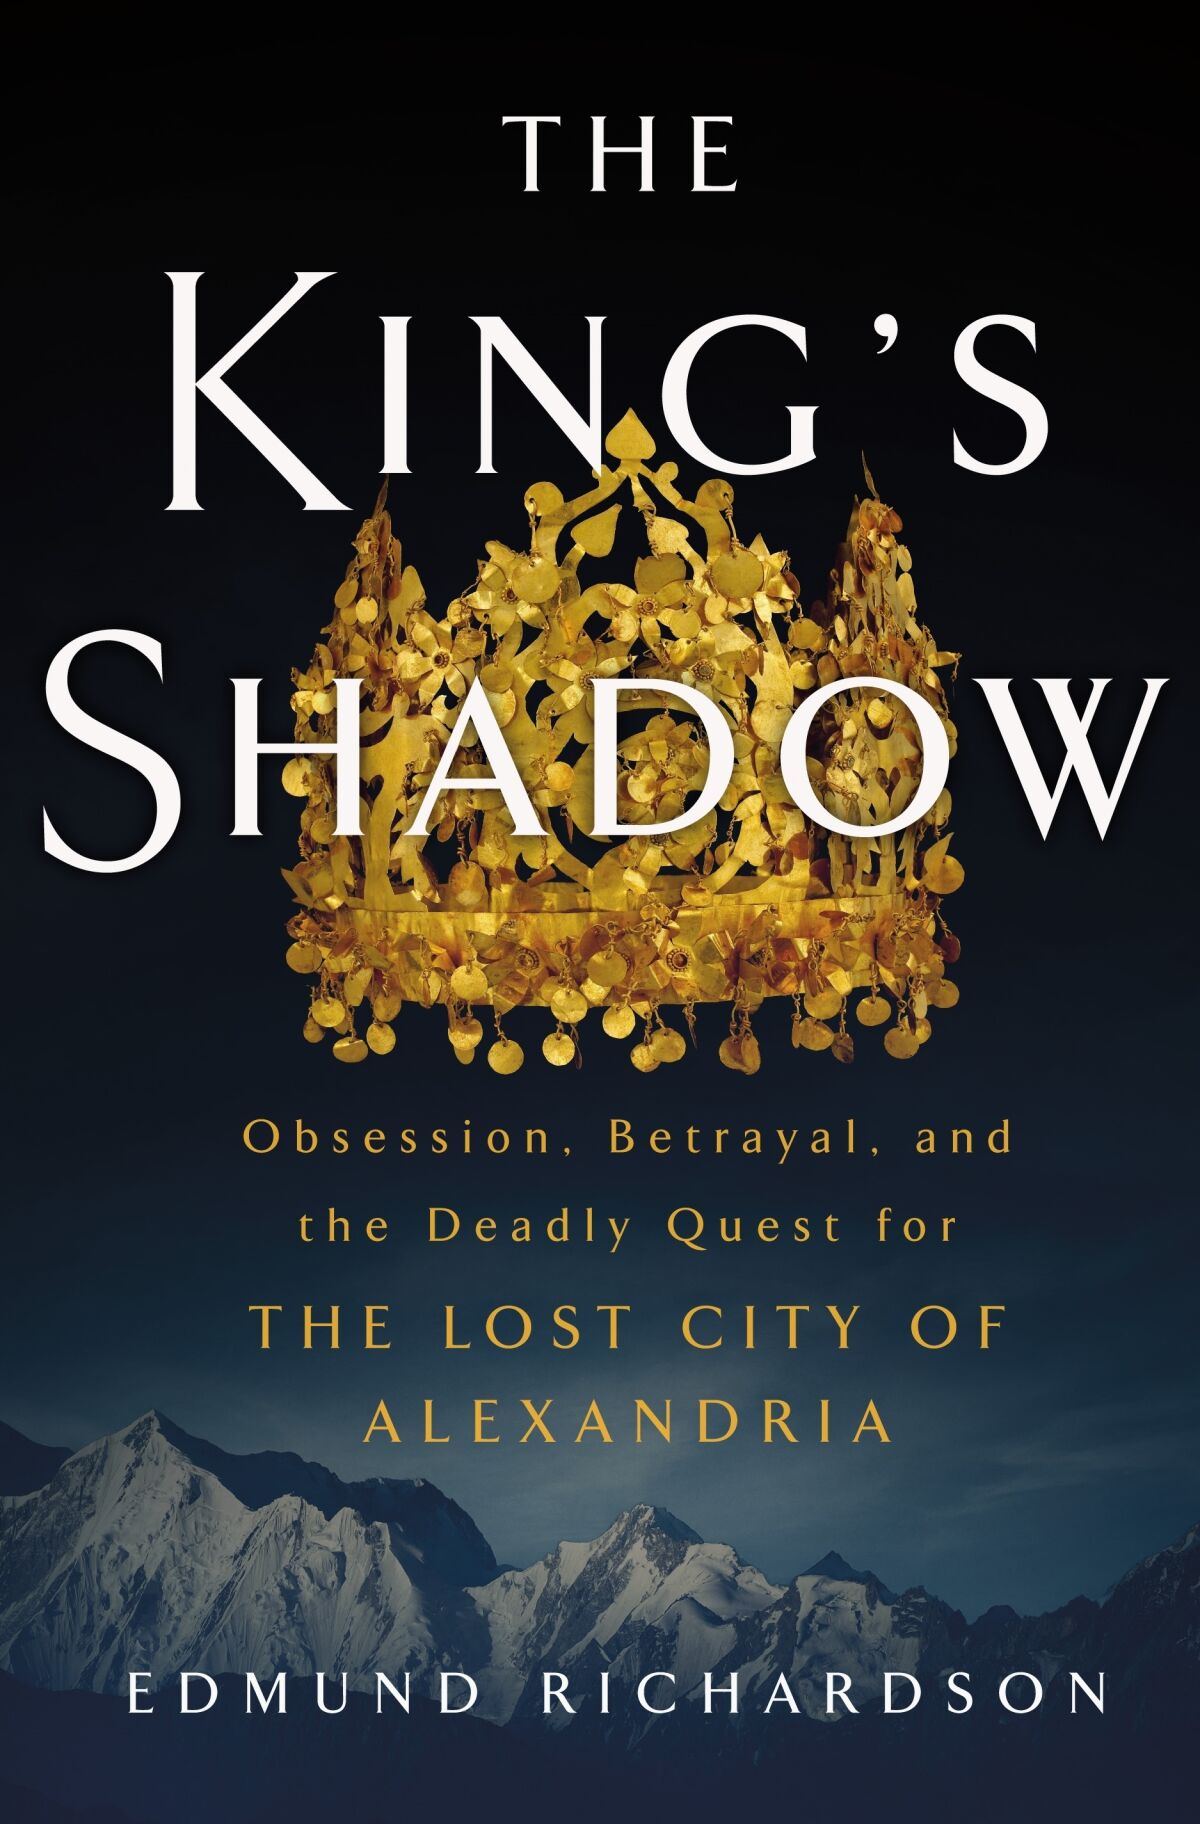 This book cover image released by St. Martin's Press shows "The King's Shadow: Obsession, Betrayal, and the Deadly Quest for the Lost City of Alexandria" by Edmund Richardson. (St. Martin's Press via AP)